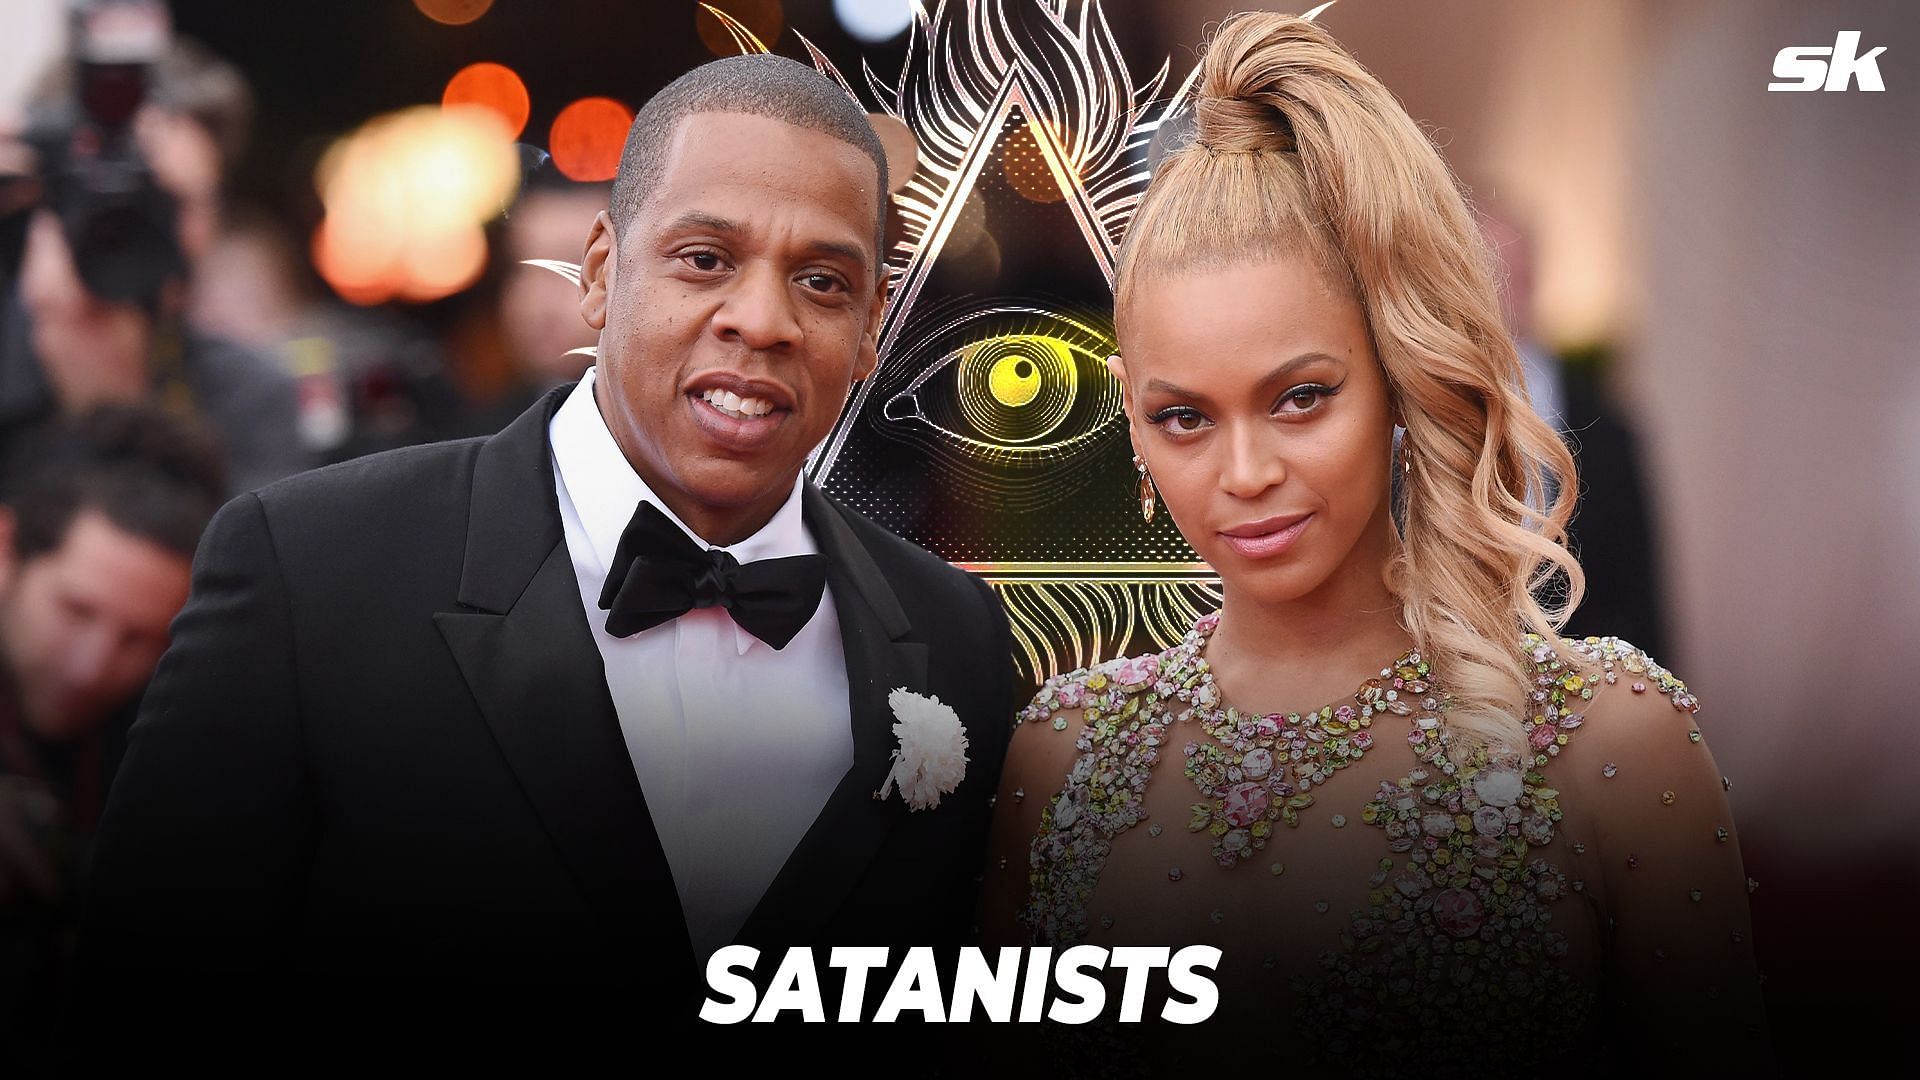 They're being controlled by Satanism' - Ex-Chiefs RB claims Jay-Z and  Beyonce work for the Illuminati